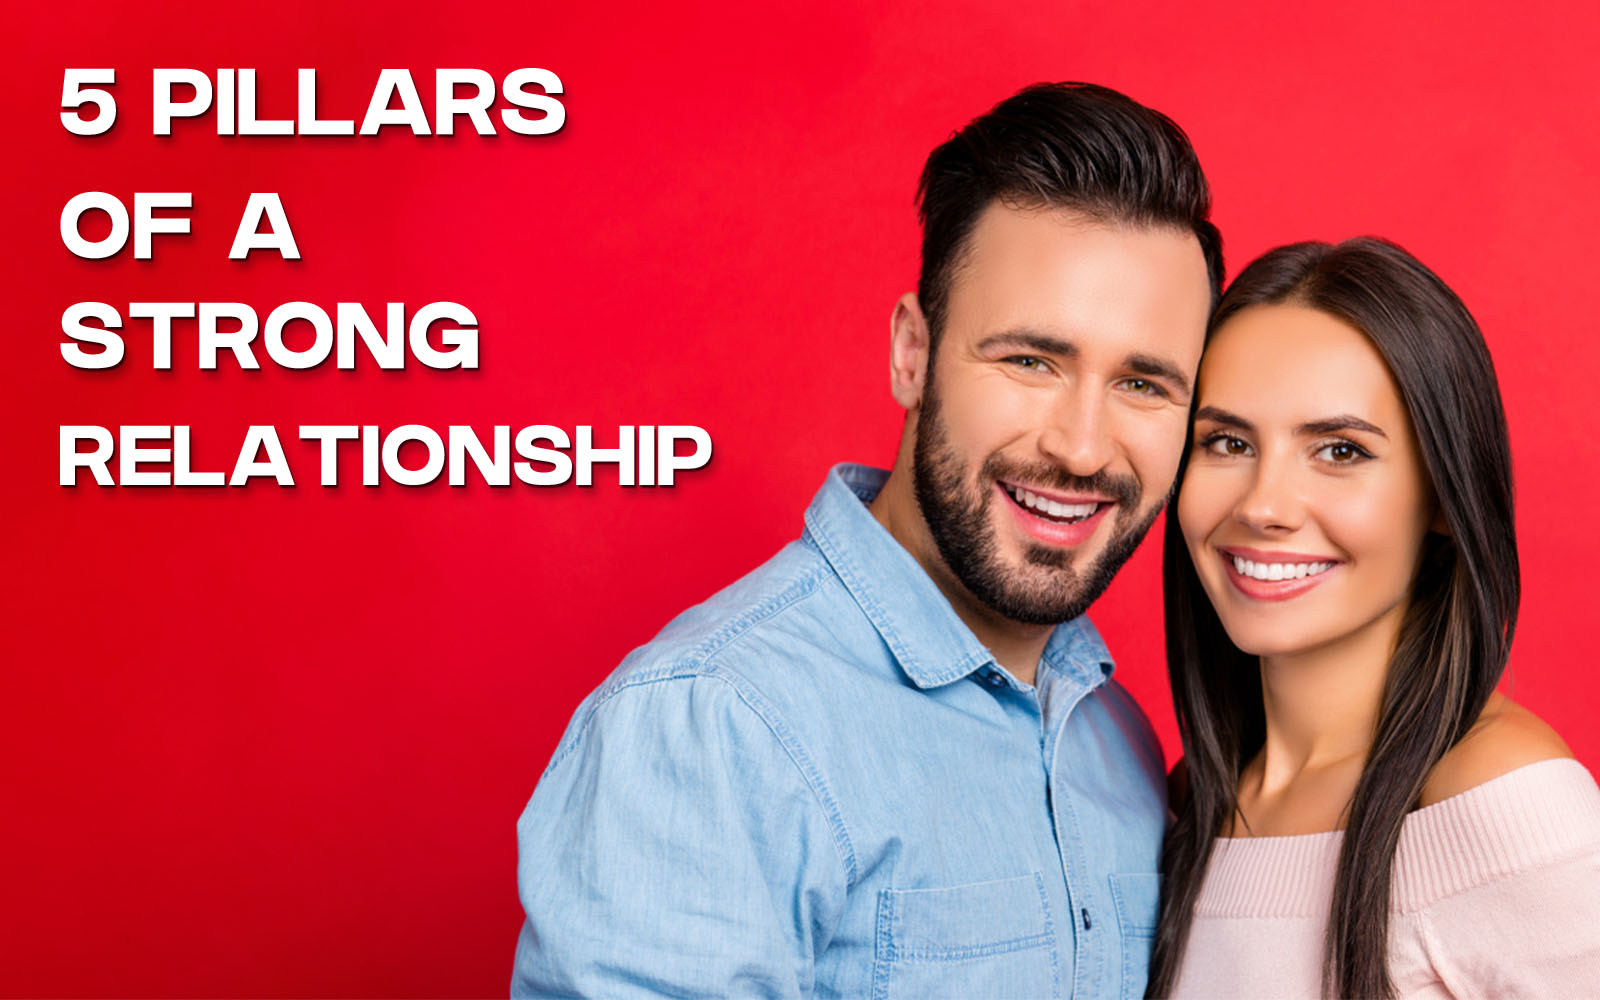 5 Pillars of a Strong Relationship